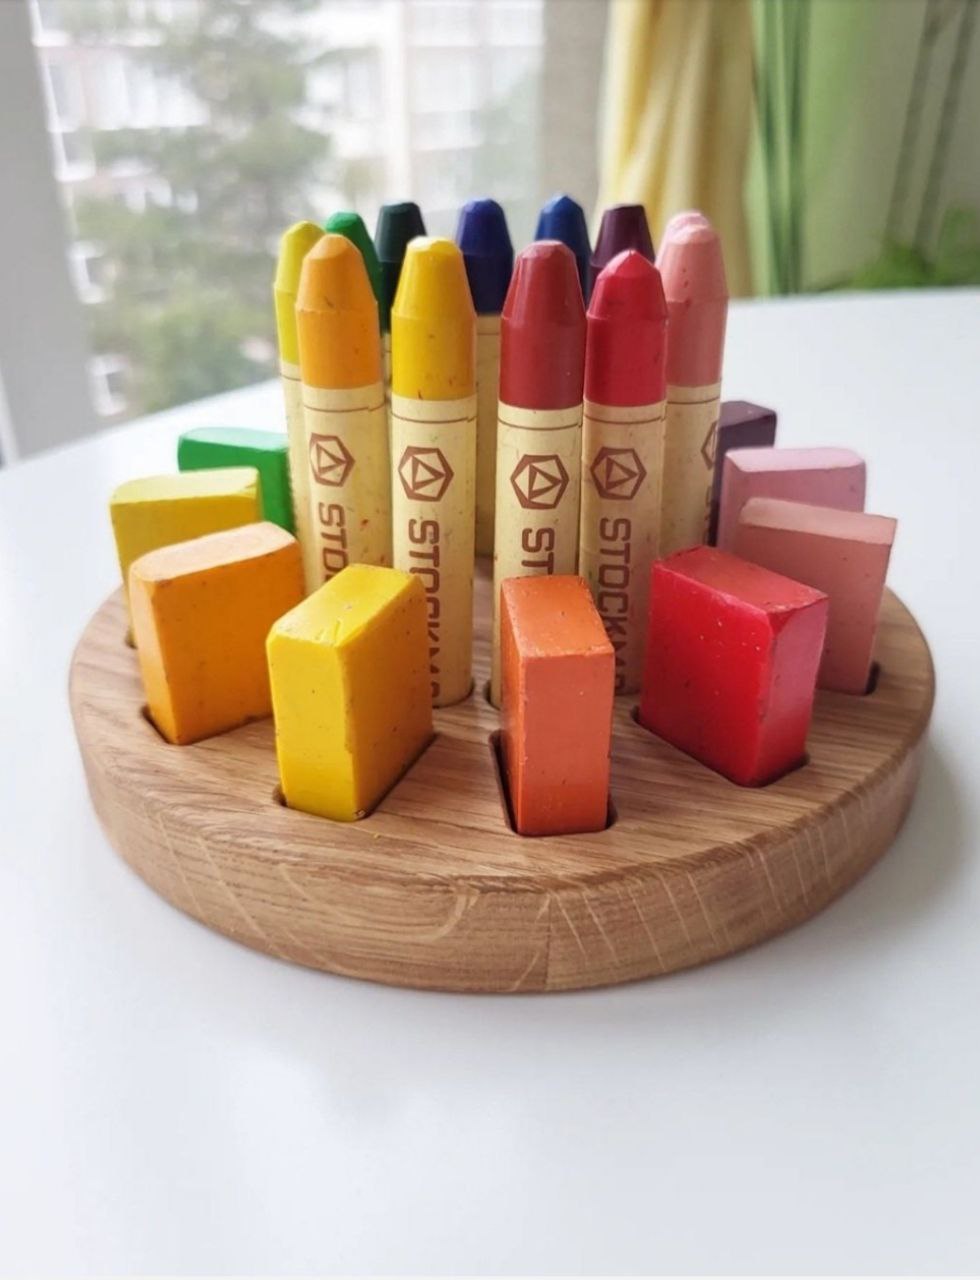 Waldorf Crayon round holder for Stockmar 12 Blocks and 12 Sticks, without crayons, crayon keeper, desk organization, gift for kids